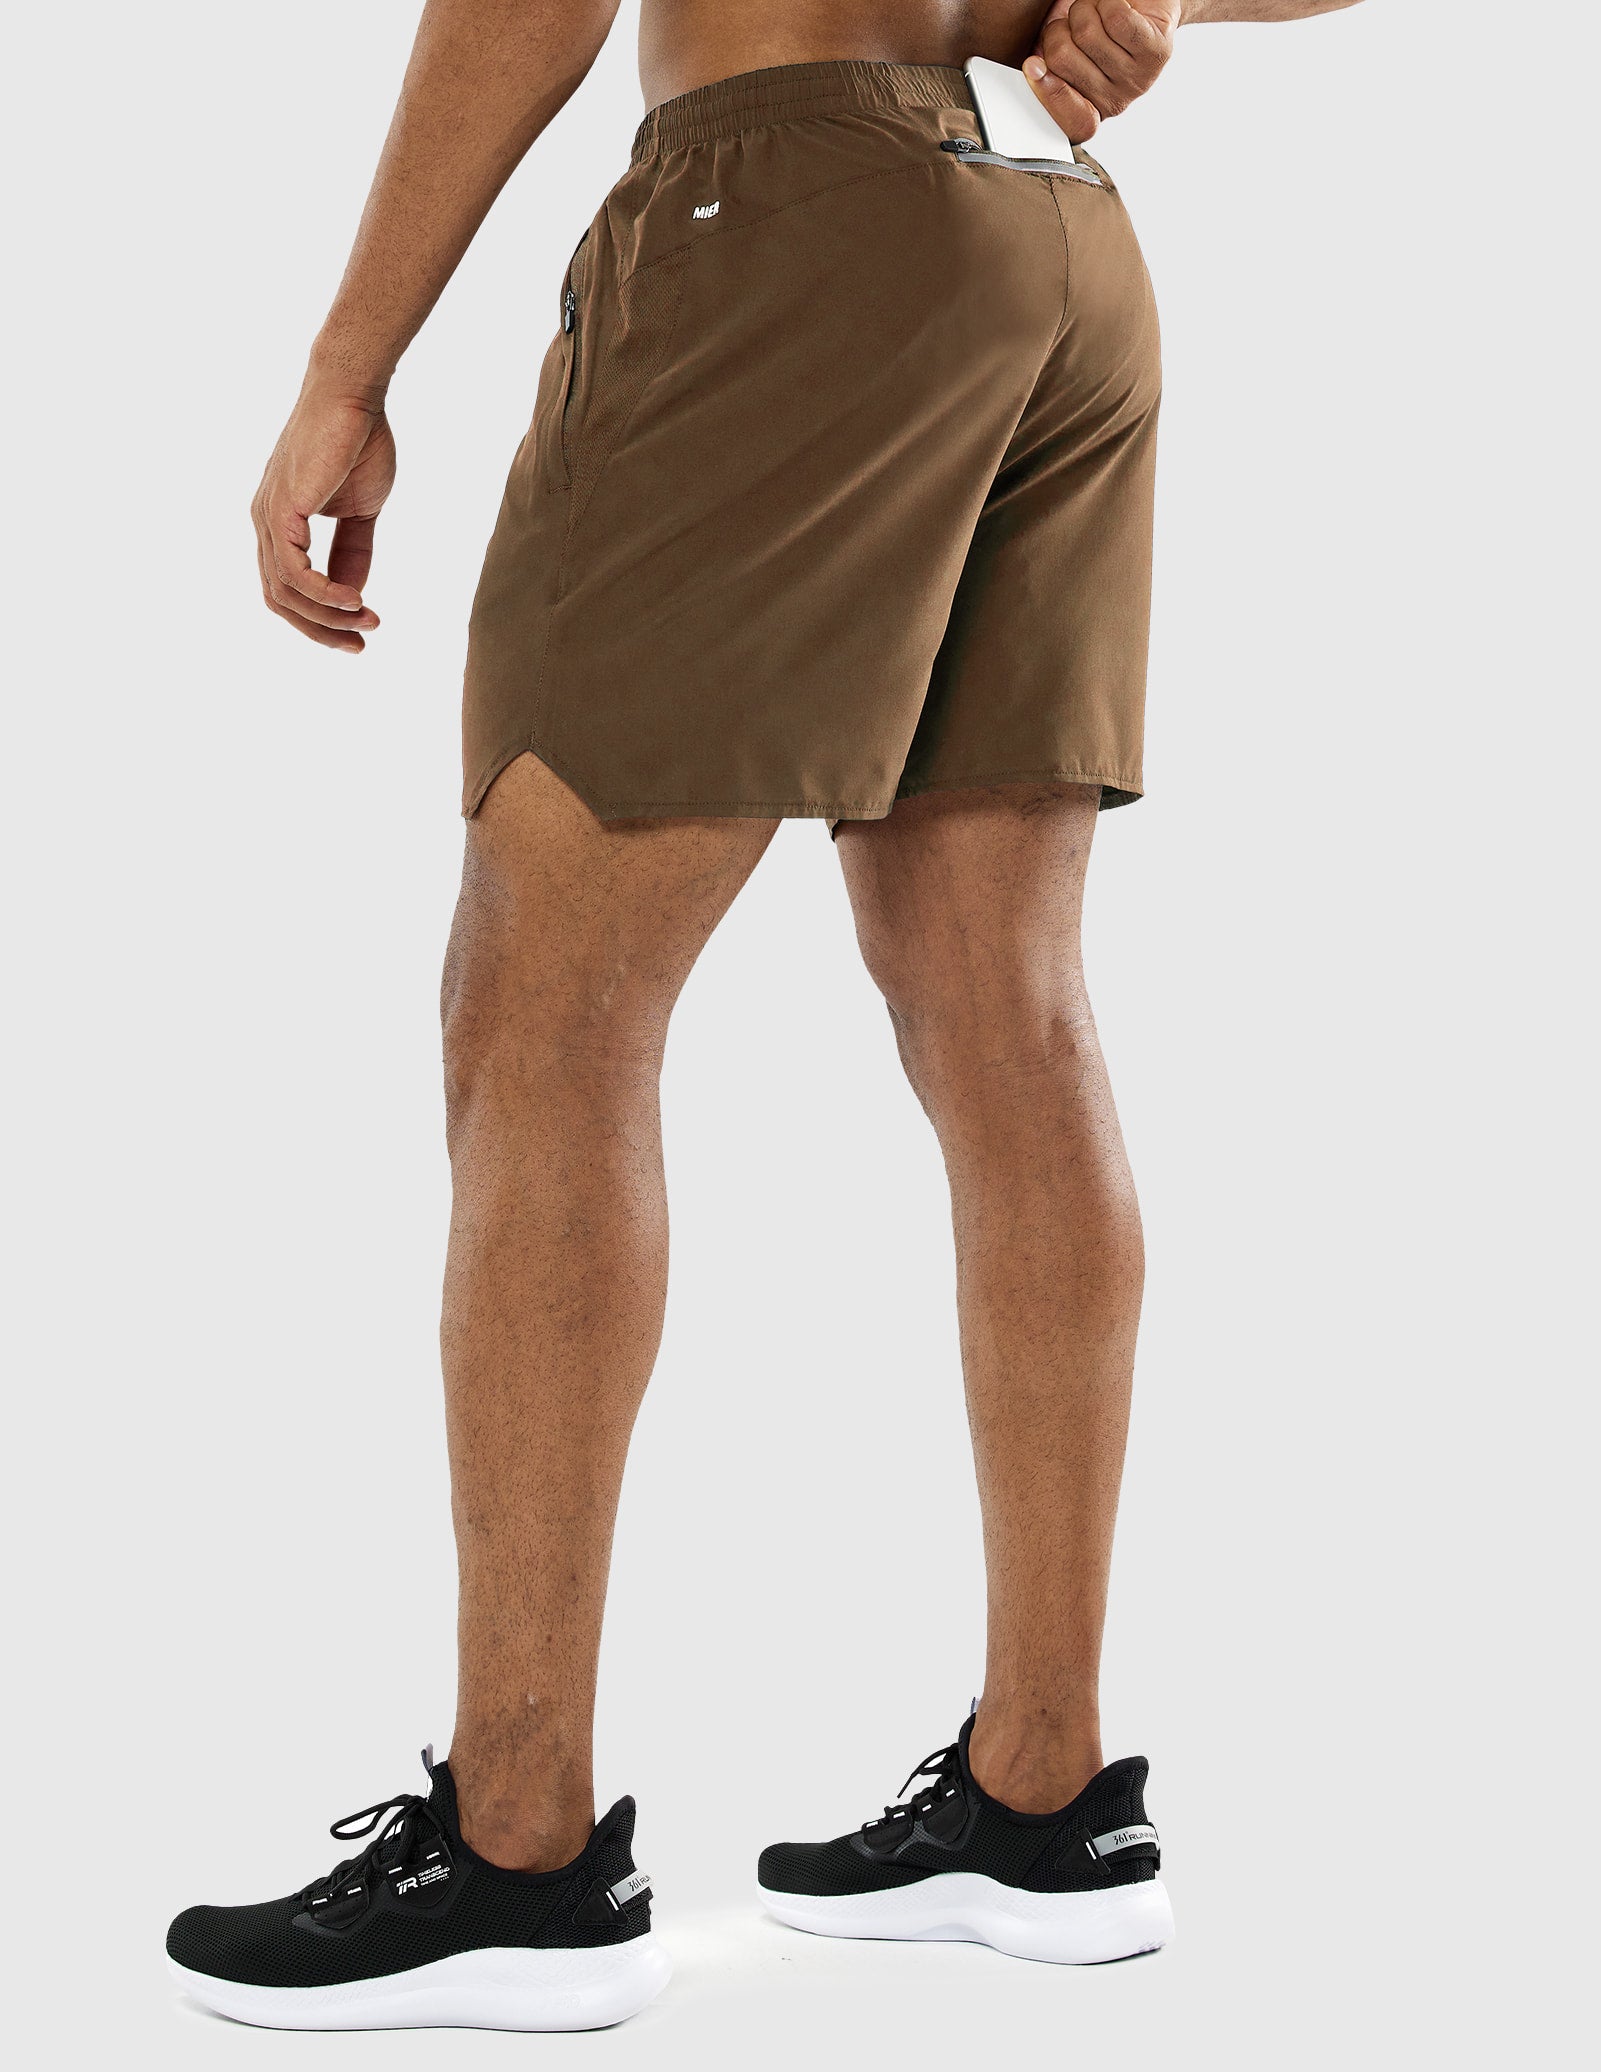 Men's Workout 5 Inches Running Shorts with Zipper Pockets